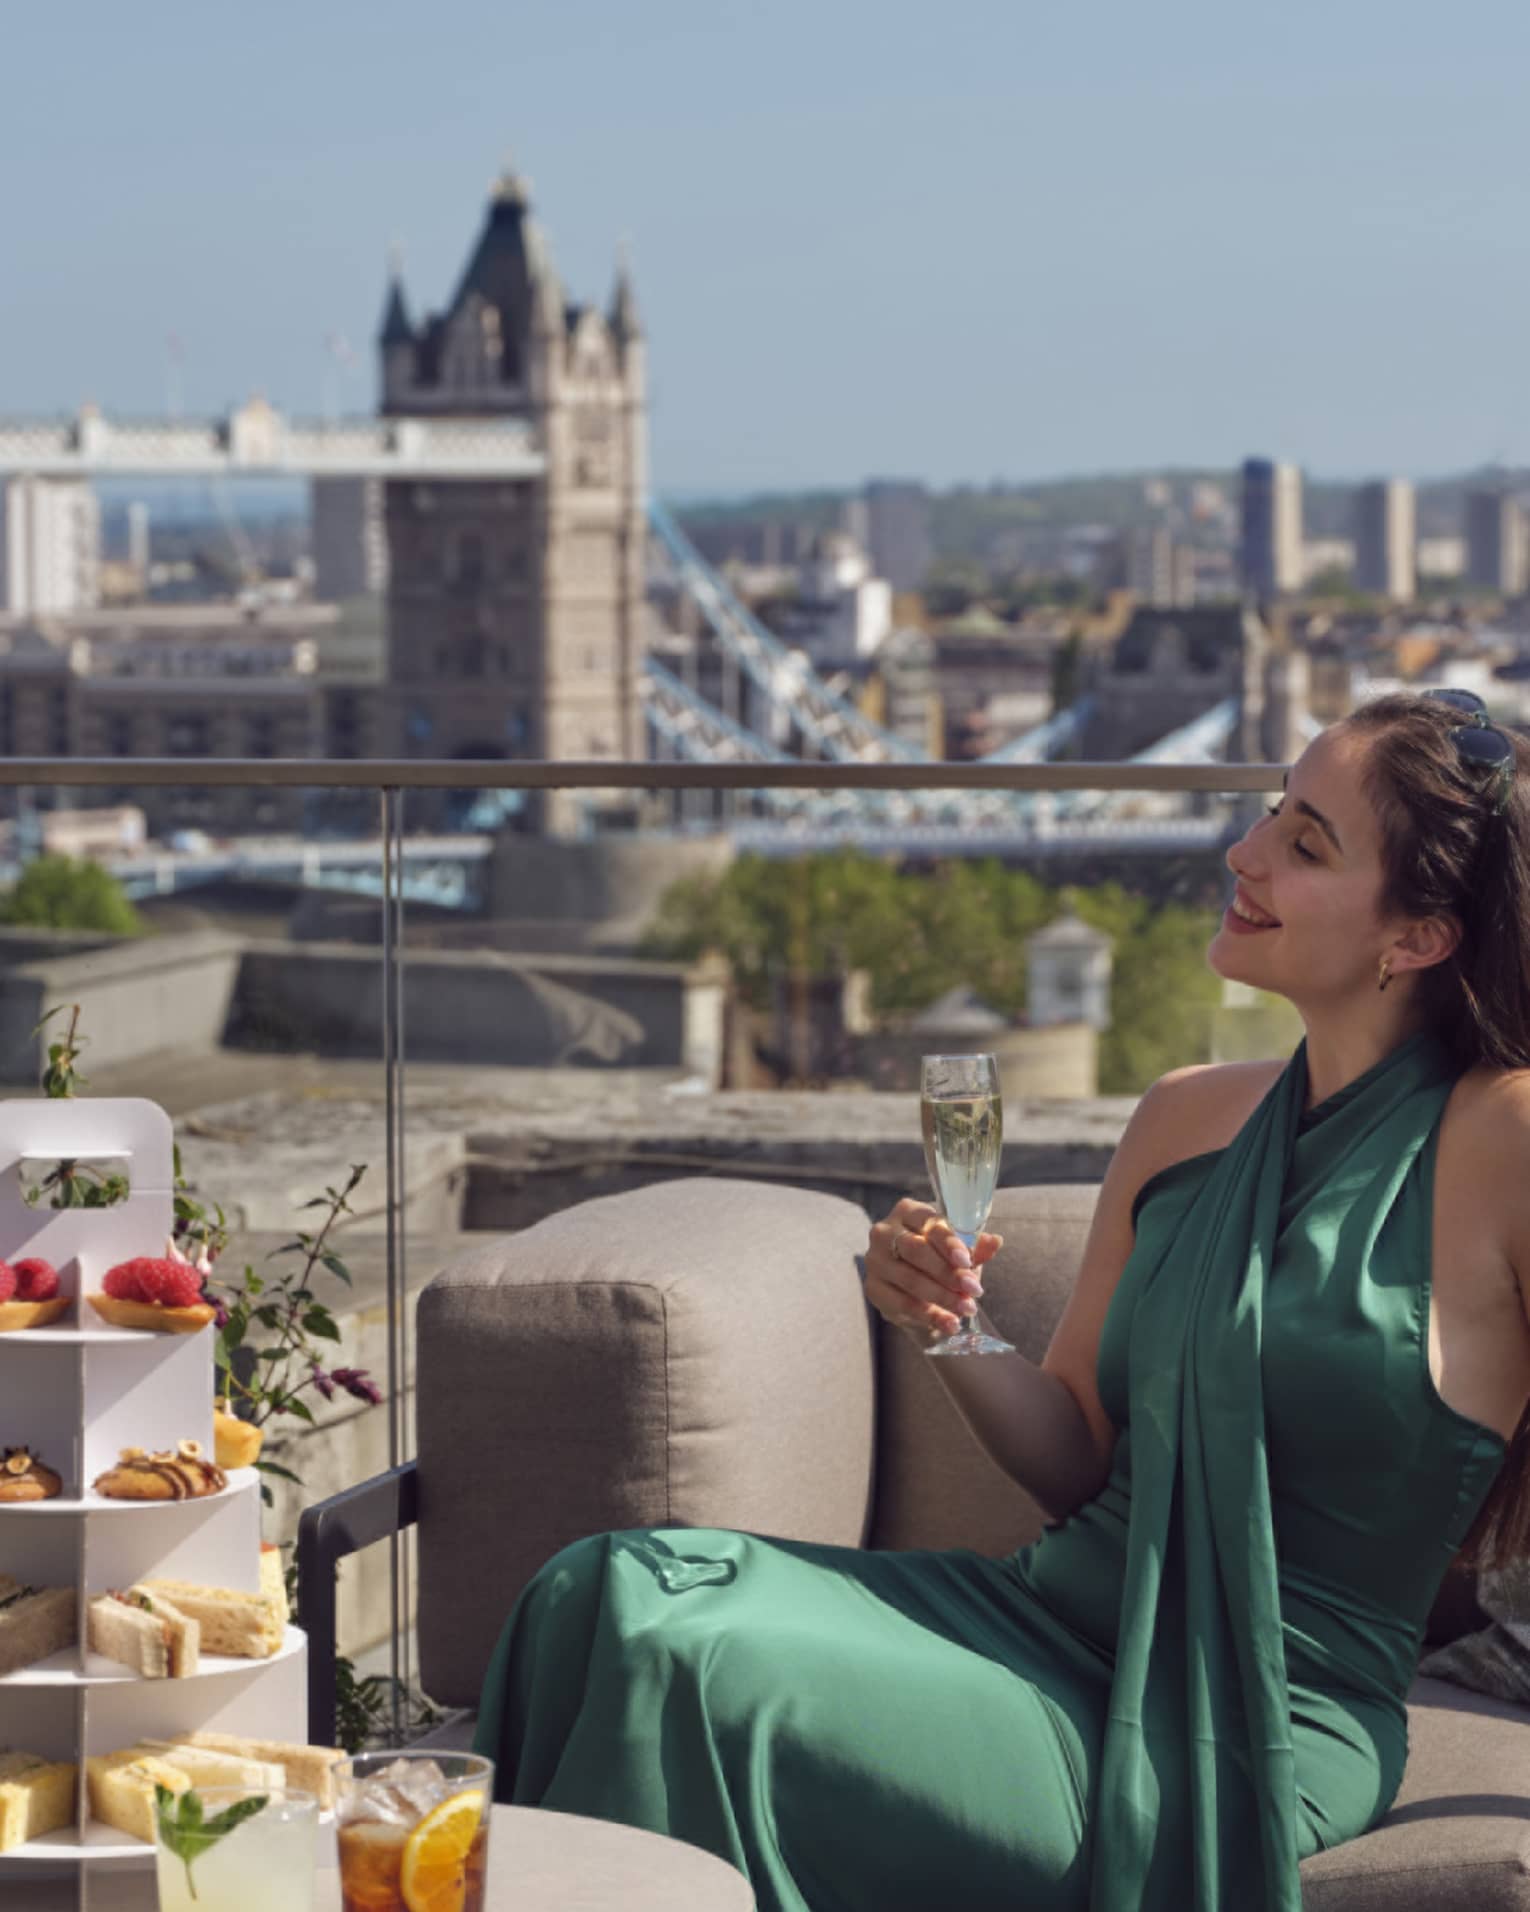 Woman in green dress holding champagne beside tea stand with confections and Tower Bridge in backdrop